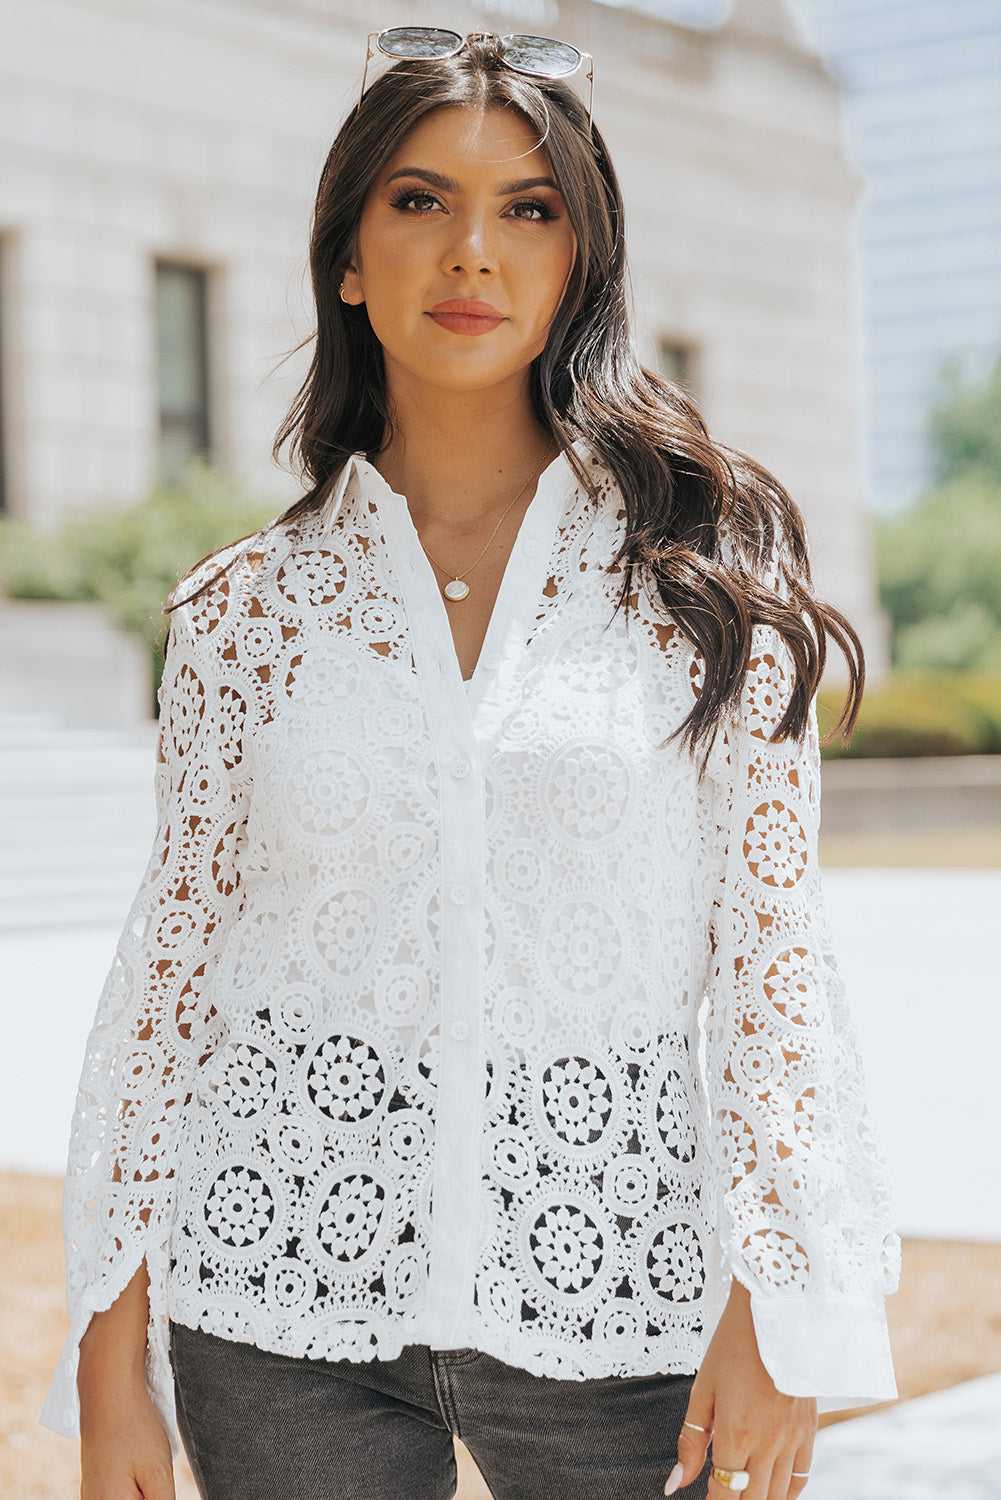 Button-Up Lace Collared Shirt- ONLINE ONLY 2-10 DAY SHIPPING